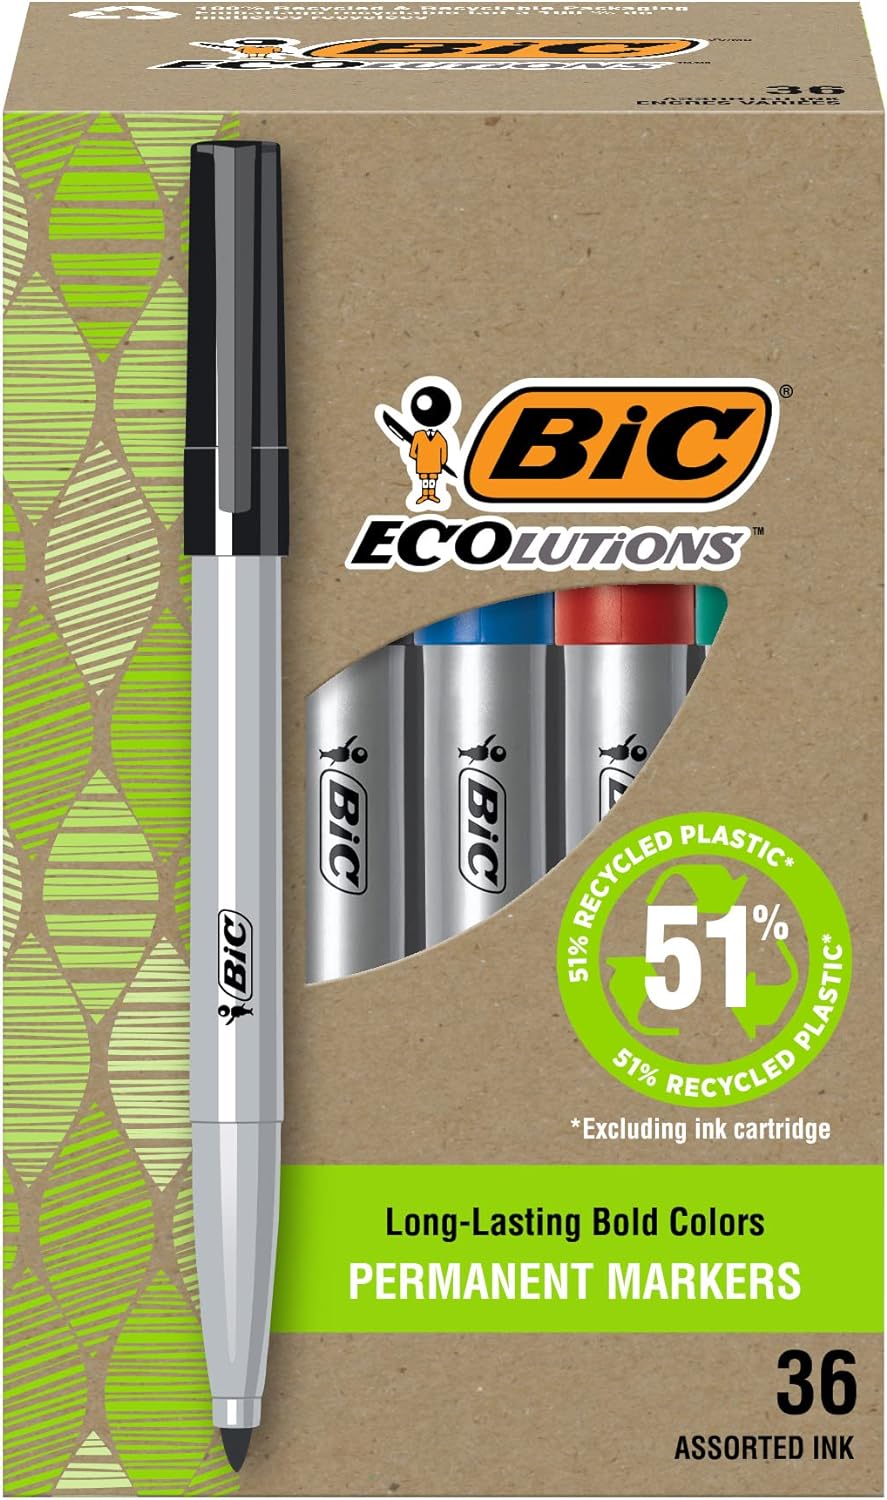 We use permanent markers for a lot of around the house and crafting projects. I really have grown to love BIC products because they work really well, are a good value, and have started becoming better for the environment.We had been a sharpie family, but I saw these BIC ReVolution markers, and I was intrigued by the fact that they dont dry out. I have tested and yes, they dont dry out for a week if you leave the caps off.I love that these are comprised of 51% recycled plastic and you can recyc